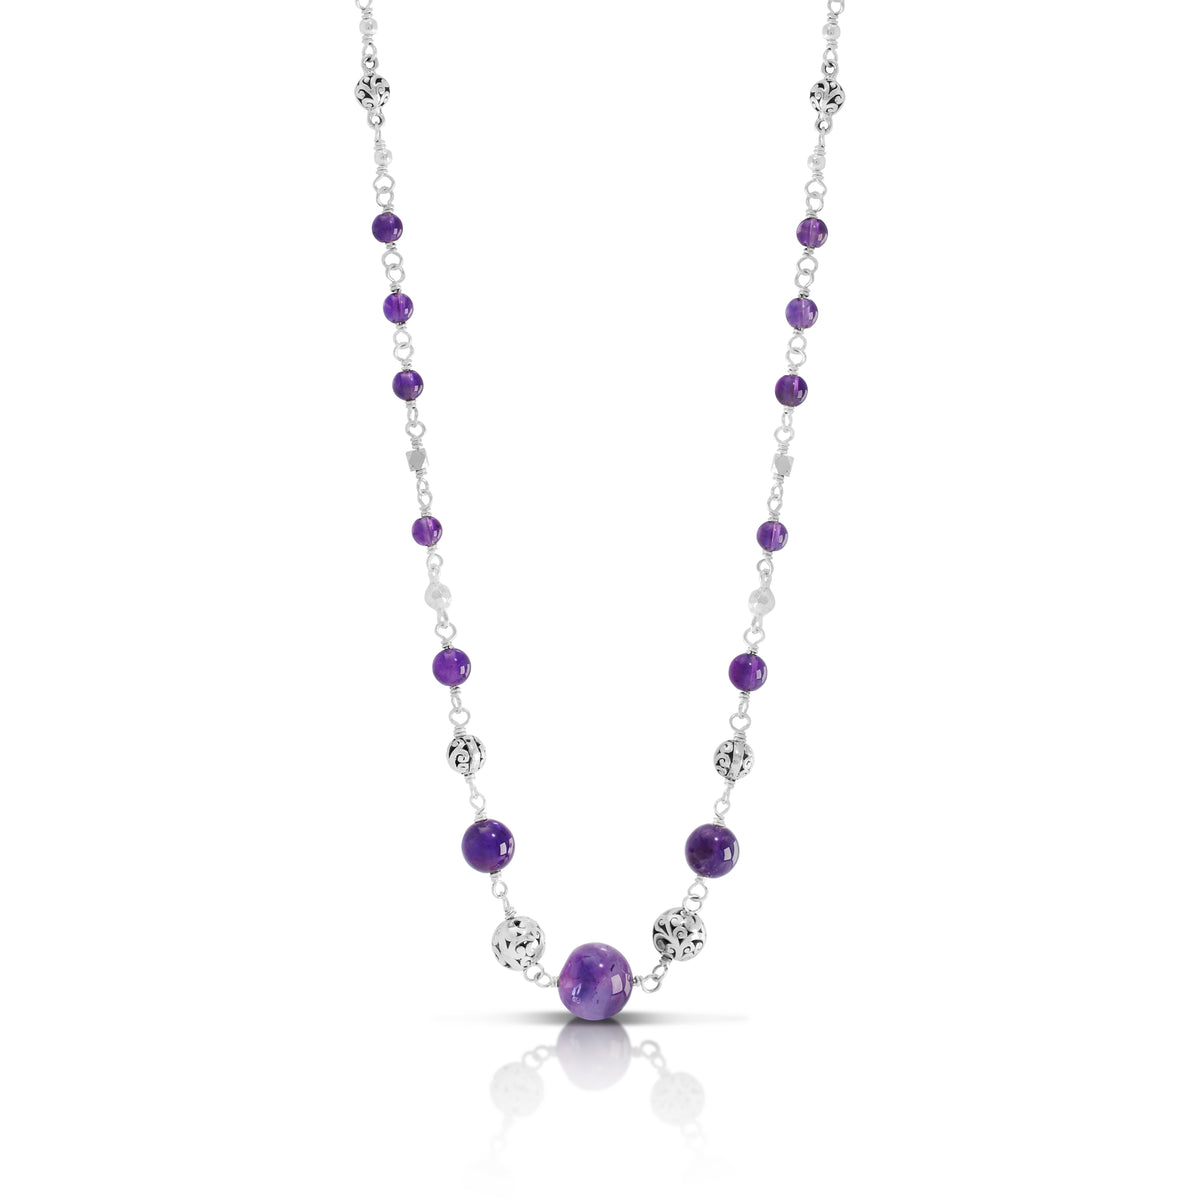 Amethyst & LH Scroll Beads Wire-Wrapped Necklace (17" - 20")